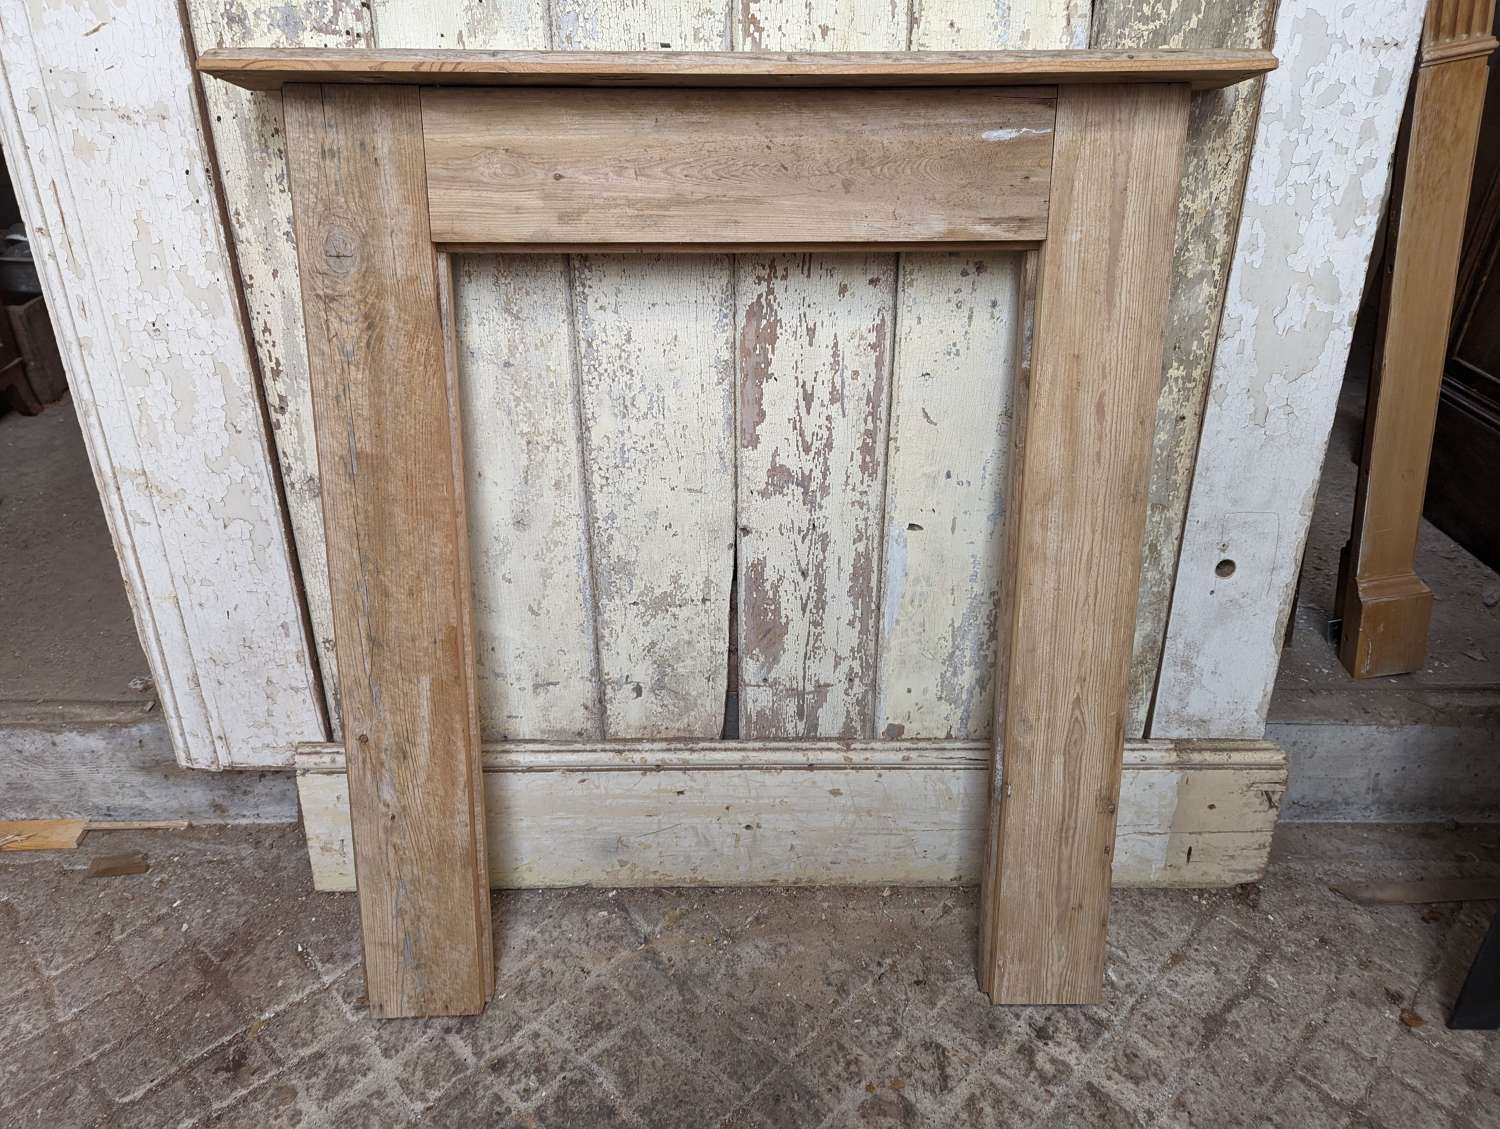 FS0265 A SMALL RECLAIMED STRIPPED PINE FIRE SURROUND